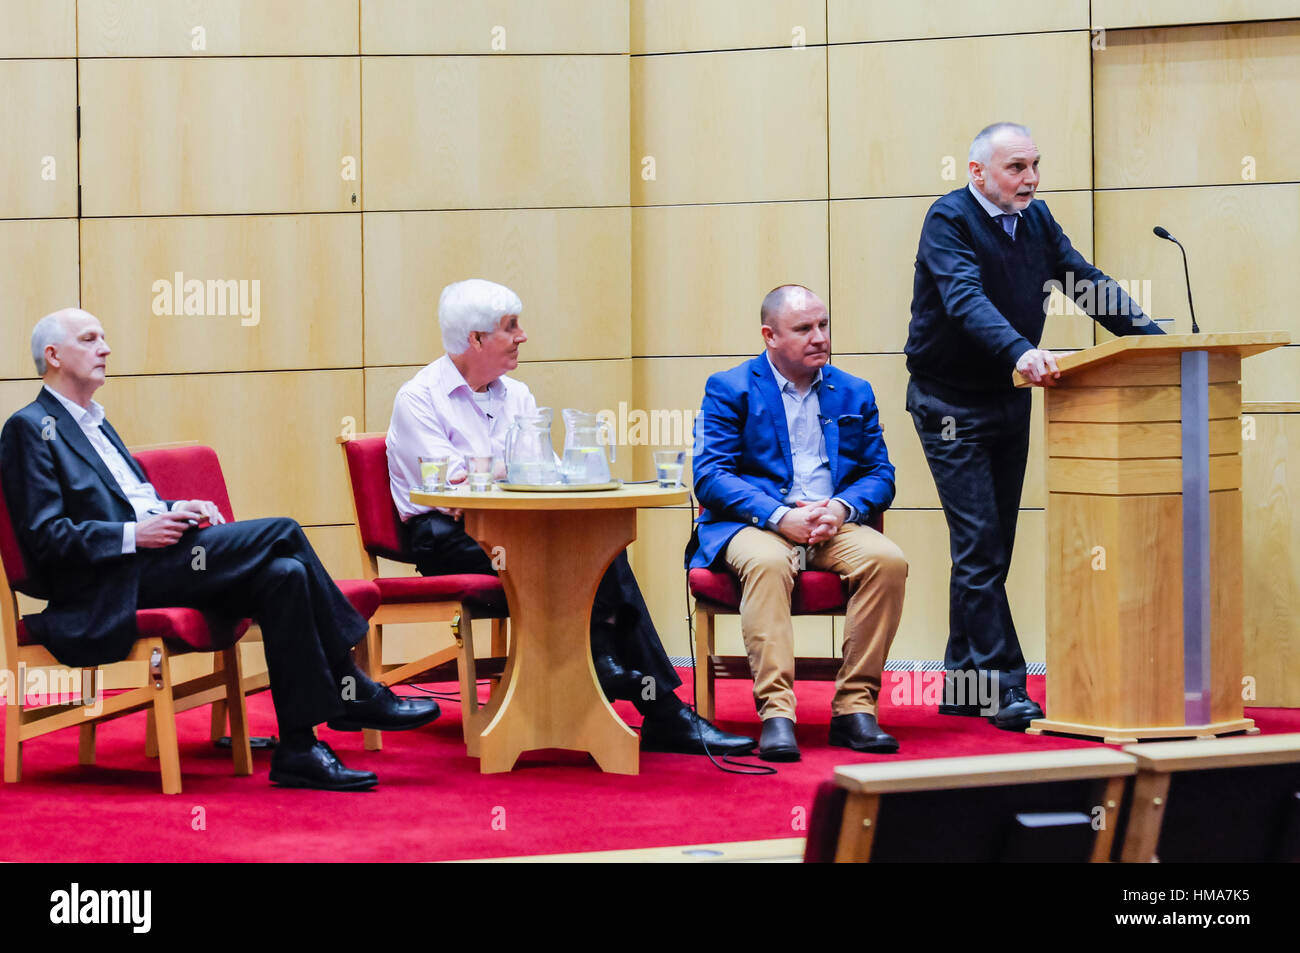 Belfast, Northern Ireland. 01 Feb 2017 - Sean Kelly takes to the podium during the 'Dealing With The Past' event organised by Rethinking Conflict takes place in Belfast.  Hosted by Reverend Gary Mason from East Belfast Mission, with guests Rev. Dr. Ken Newell, former Moderator of the Presbyterian Church in Ireland, political commentator and columnist Alex Kane, and former IRA Volunteer Sean Kelly, who was injured in the Shankill Bomb attack in 1993, and has worked towards the peace process since then.  The event was orginally planned to take place at the Skainos Centre in East Belfast, but was Stock Photo